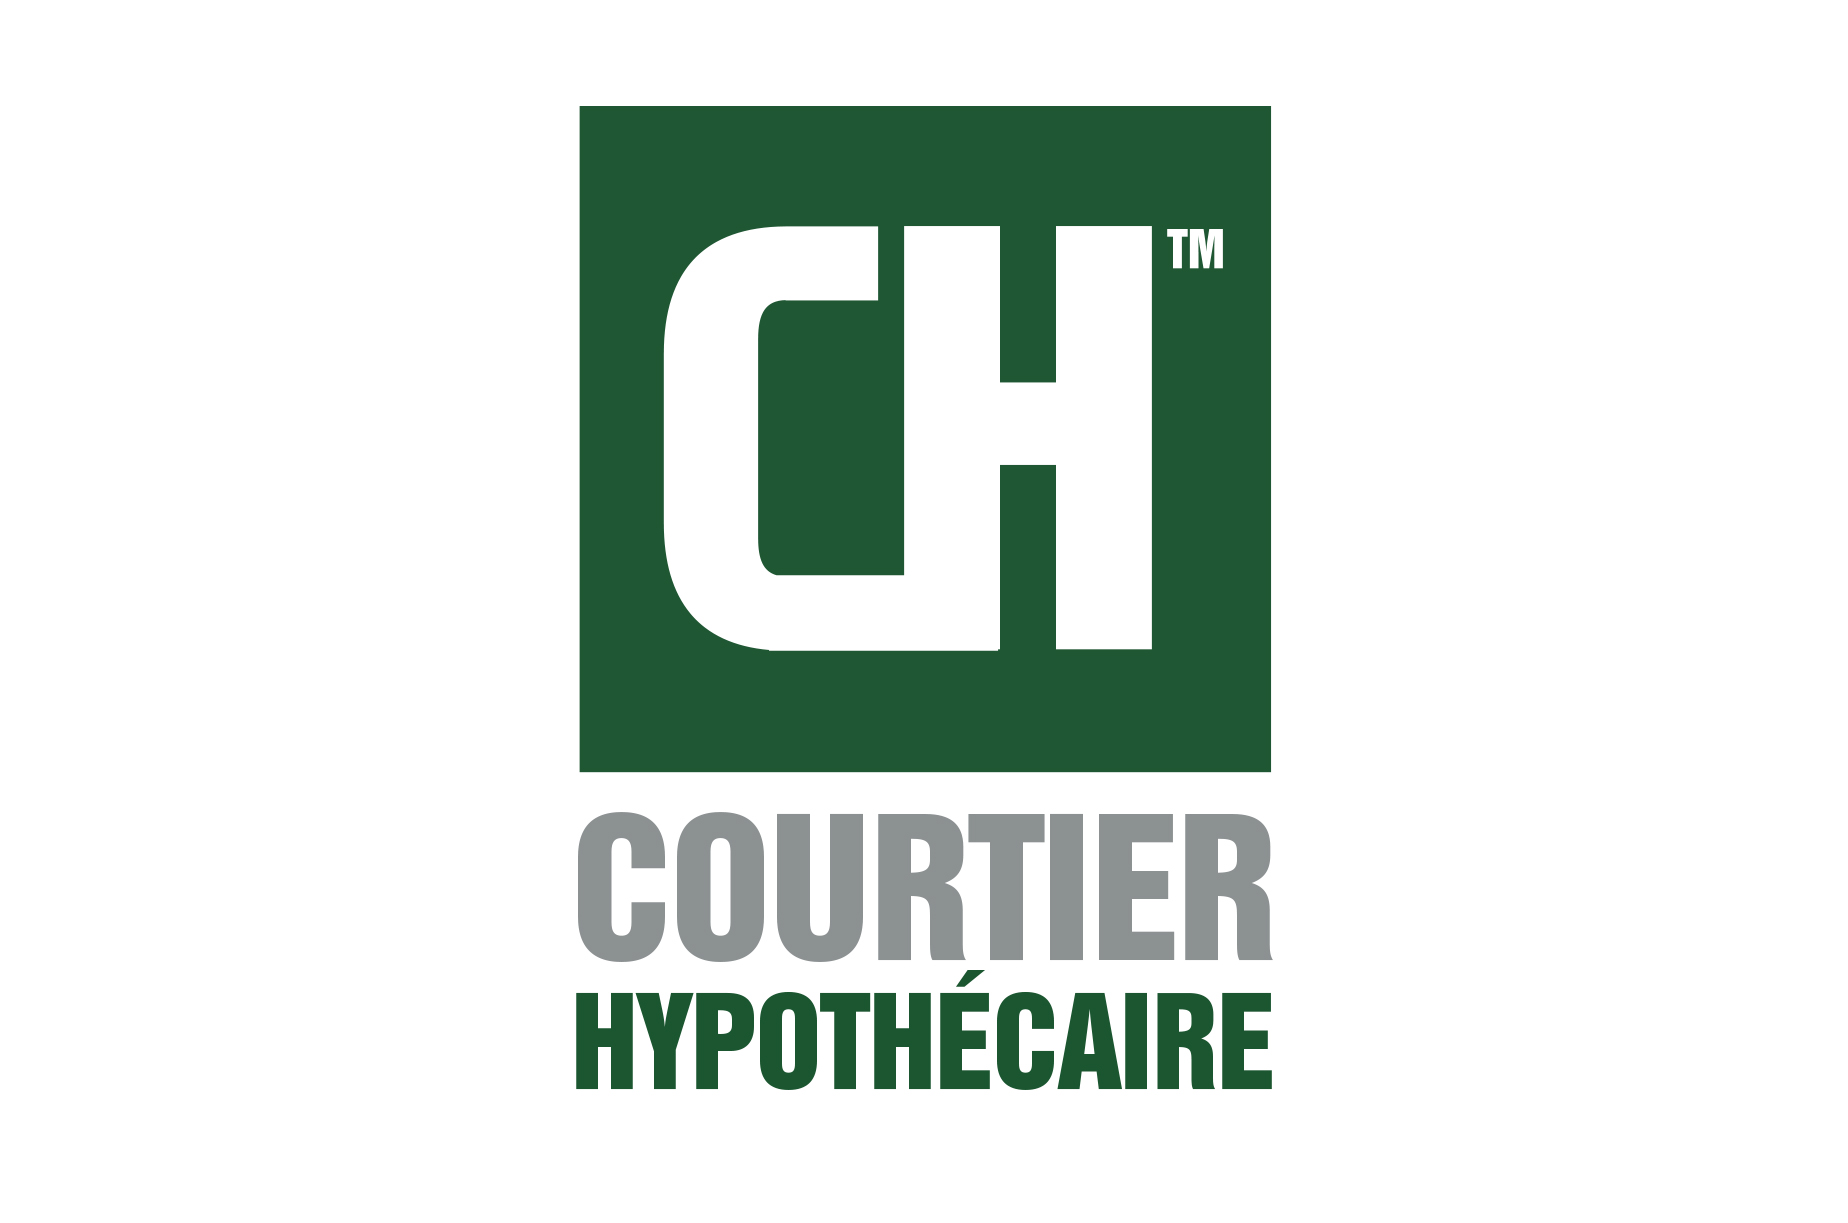 Courtier Hypothecaire